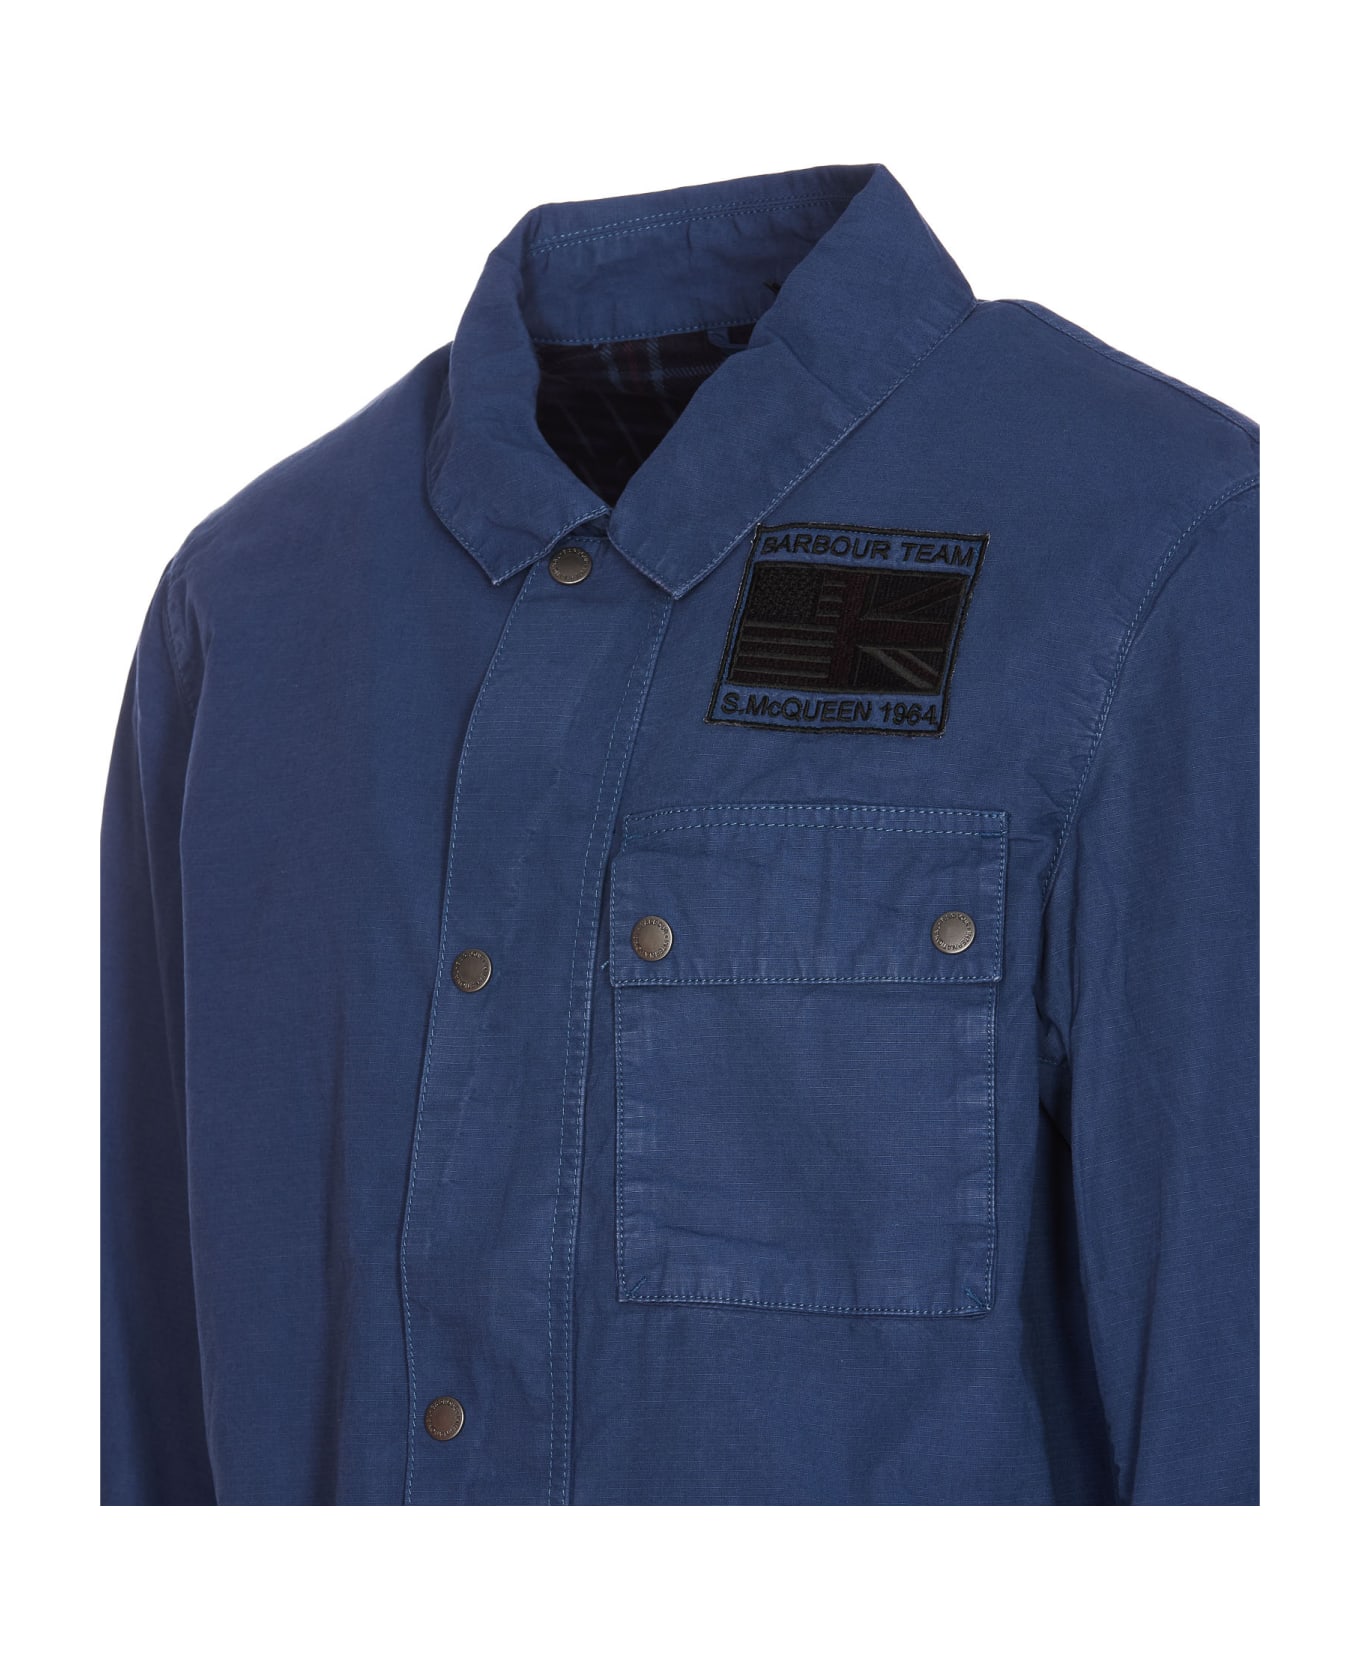 Barbour Workers Casual Jacket - Washed Cobalt